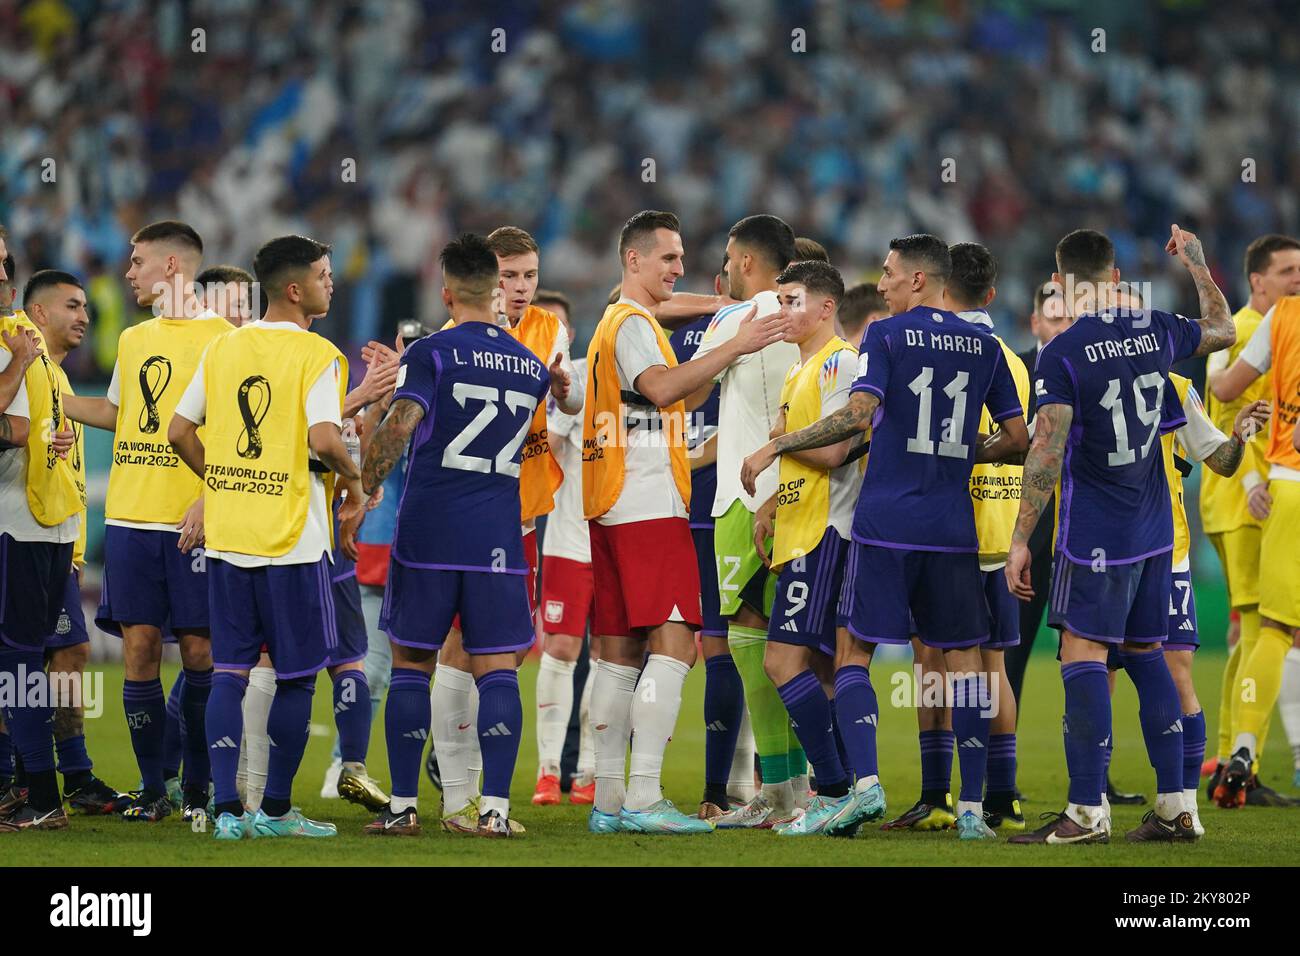 DOHA, QATAR - NOVEMBER 30: Players of Argentina celebrate the victory during the FIFA World Cup Qatar 2022 group C match between Argentina and Poland at Stadium 974 on November 30, 2022 in Doha, Qatar. (Photo by Florencia Tan Jun/PxImages) Credit: Px Images/Alamy Live News Stock Photo